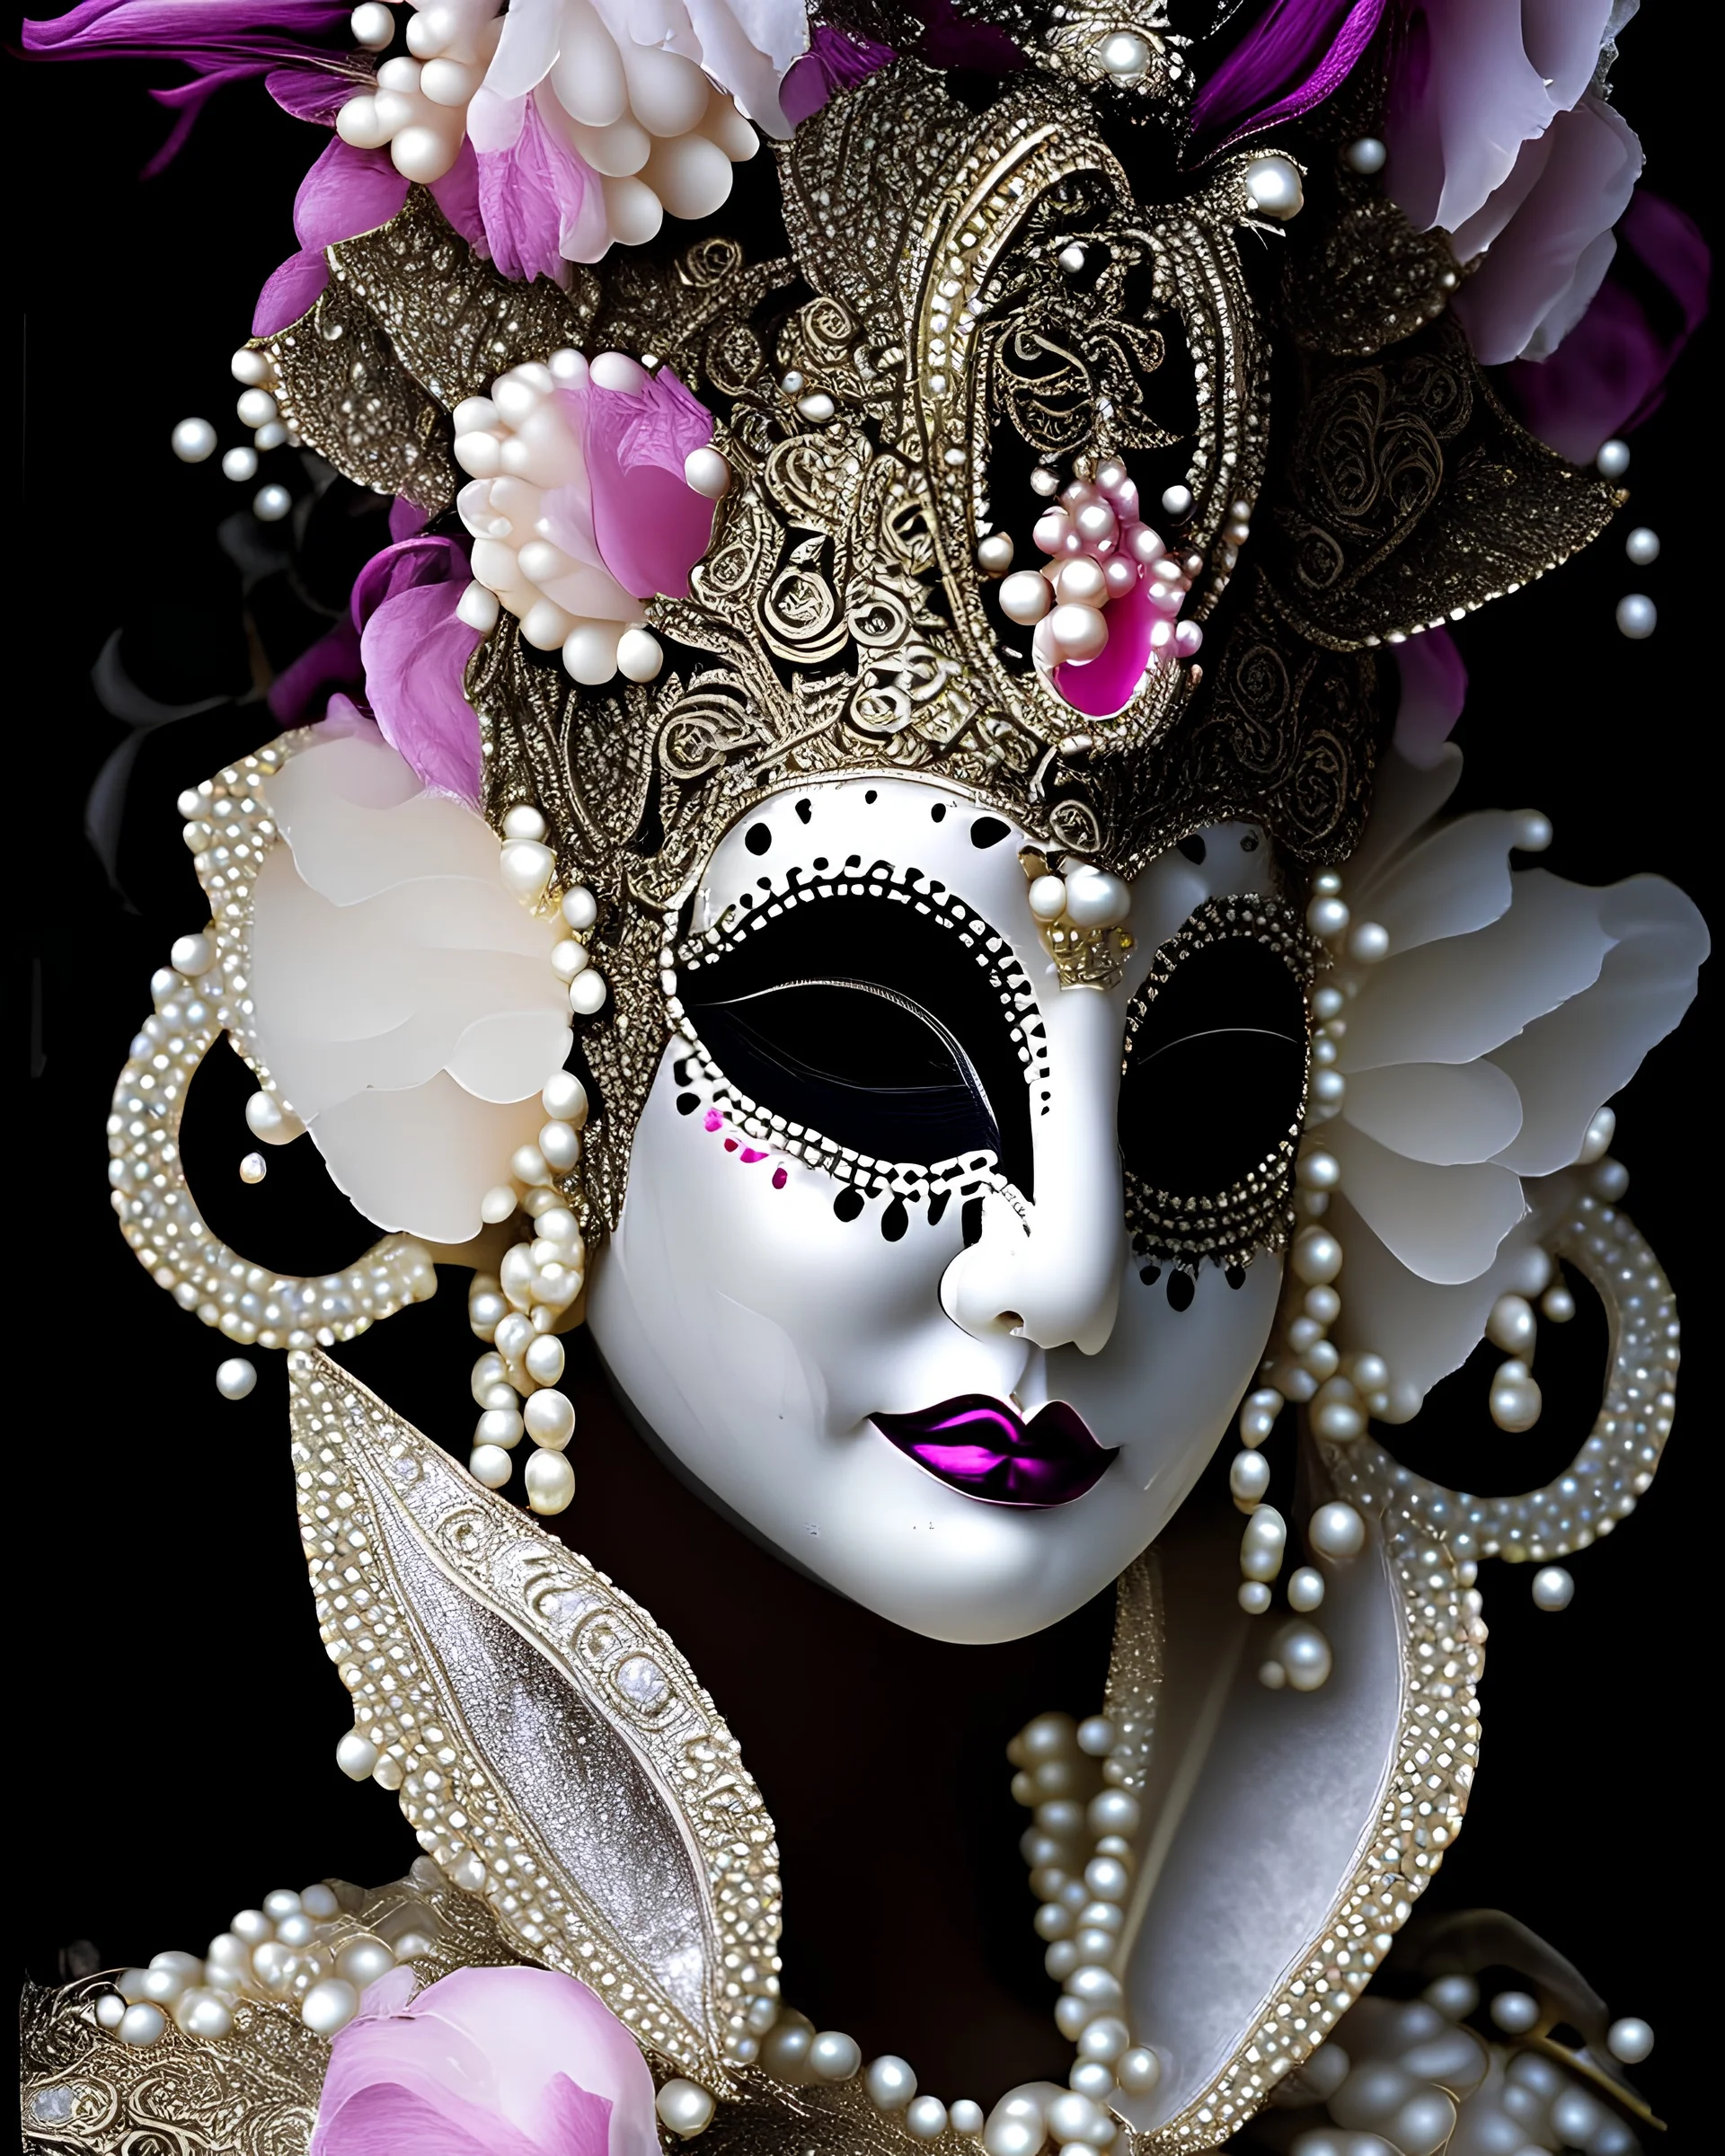 Beautiful venetian canial wite ad black bioluminescense and pink irridescensestyle woman adorned with pearl art, mollusk shell headress with mollusk shell colour water lily black irridescent flower wearing pearl art style mollusk shell ribbed costume metallic filigree venetian carnival style Golden dust make up, irridescent masque and costume organic bio spinal al ribbed bokeh mollusk pearl art shell background full florals lights extremely detailed hyperrealistic. Maximálist concept portrait ar